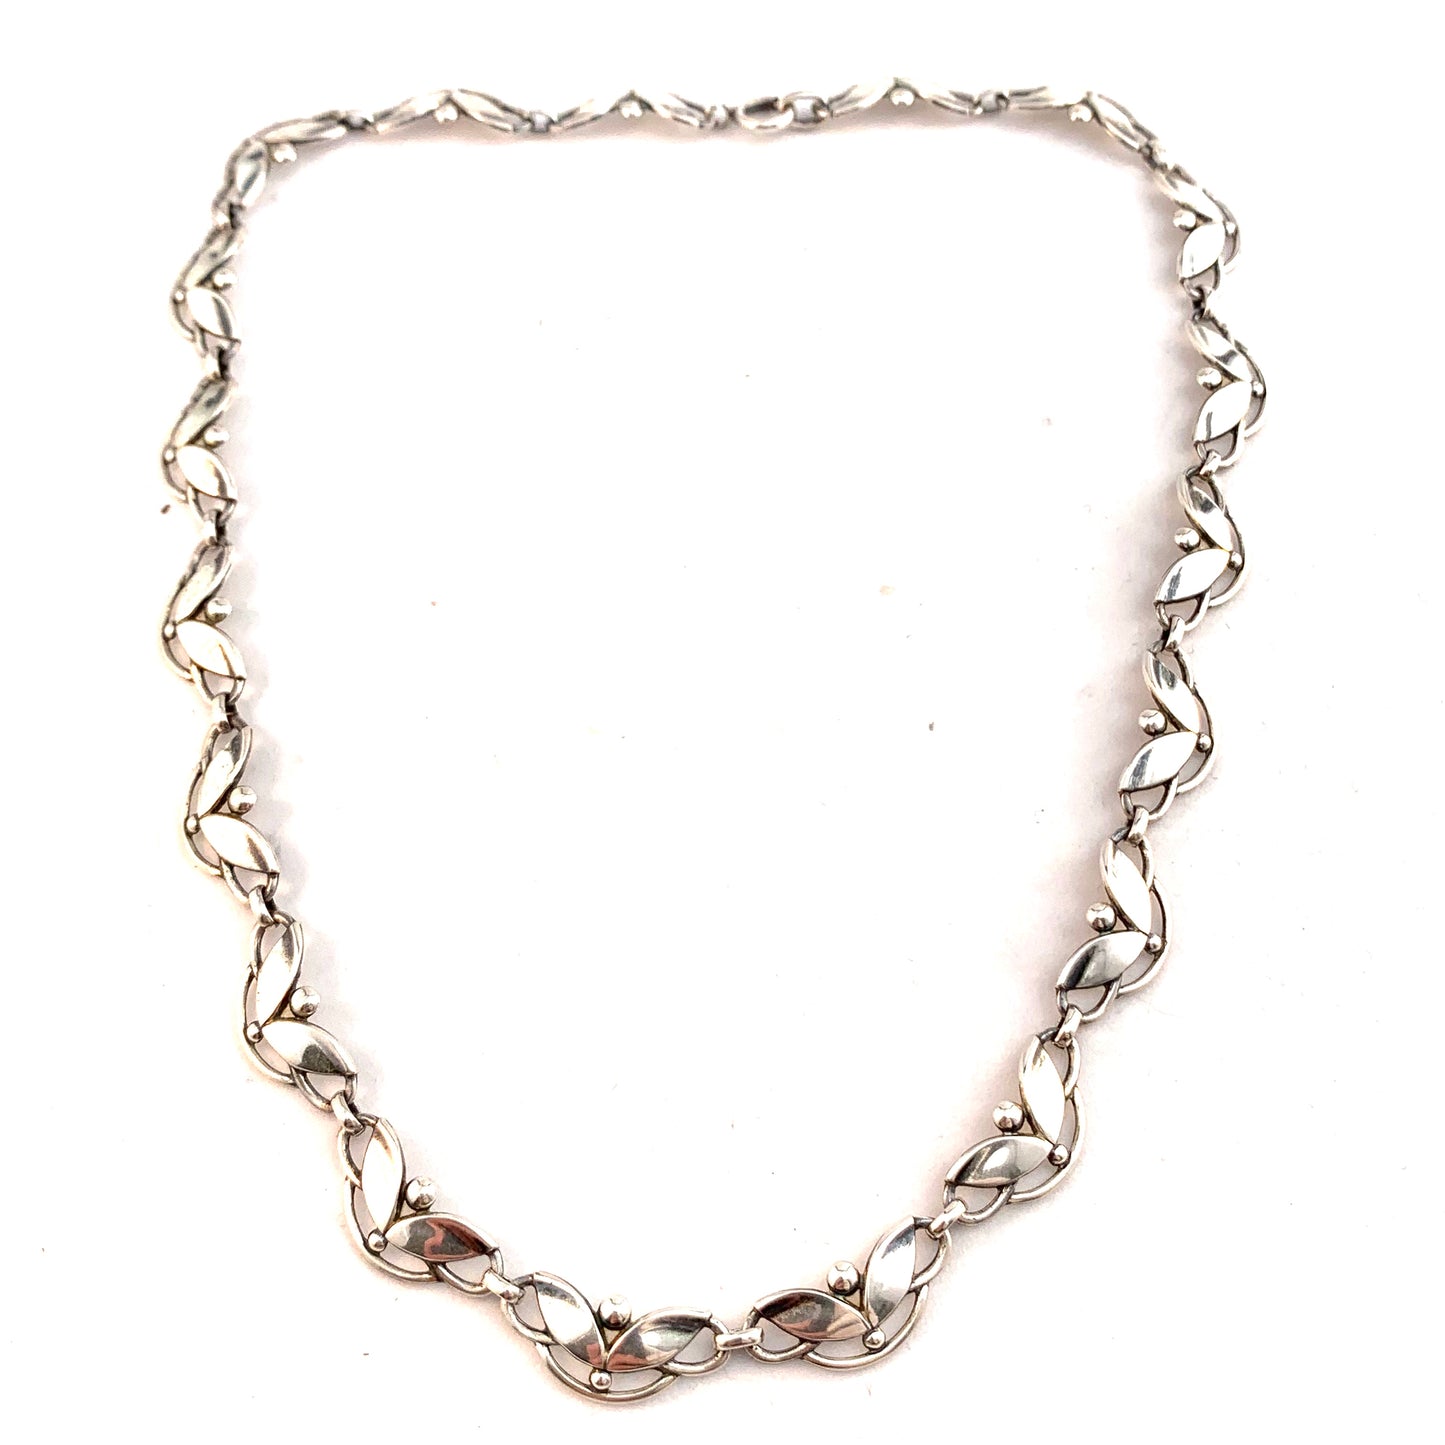 Swedish Import 1950s Vintage Solid 830 Silver Necklace.